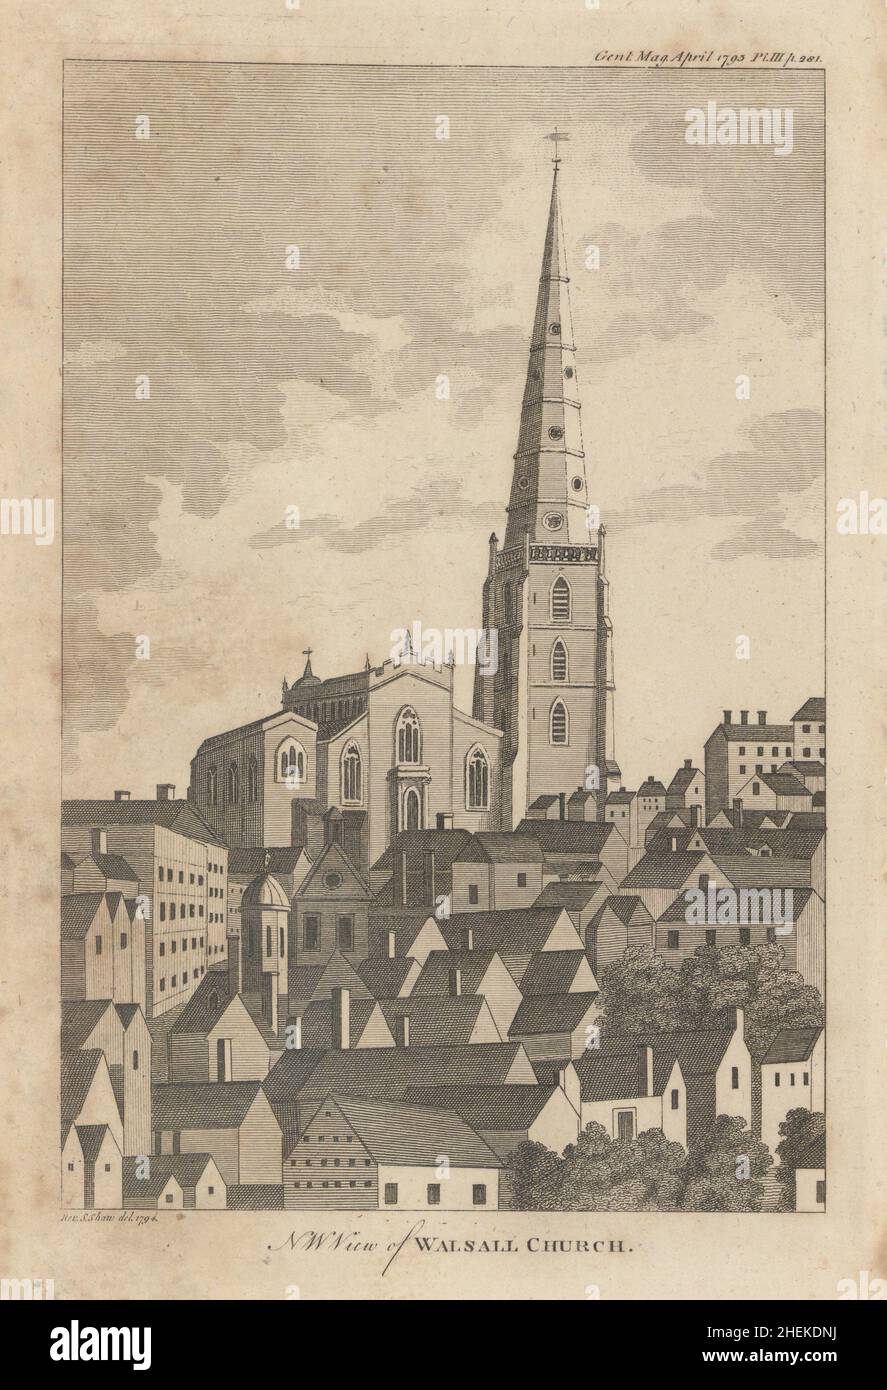 St Matthew's Church and part of the town of Walsall, Staffordshire 1795 print Stock Photo